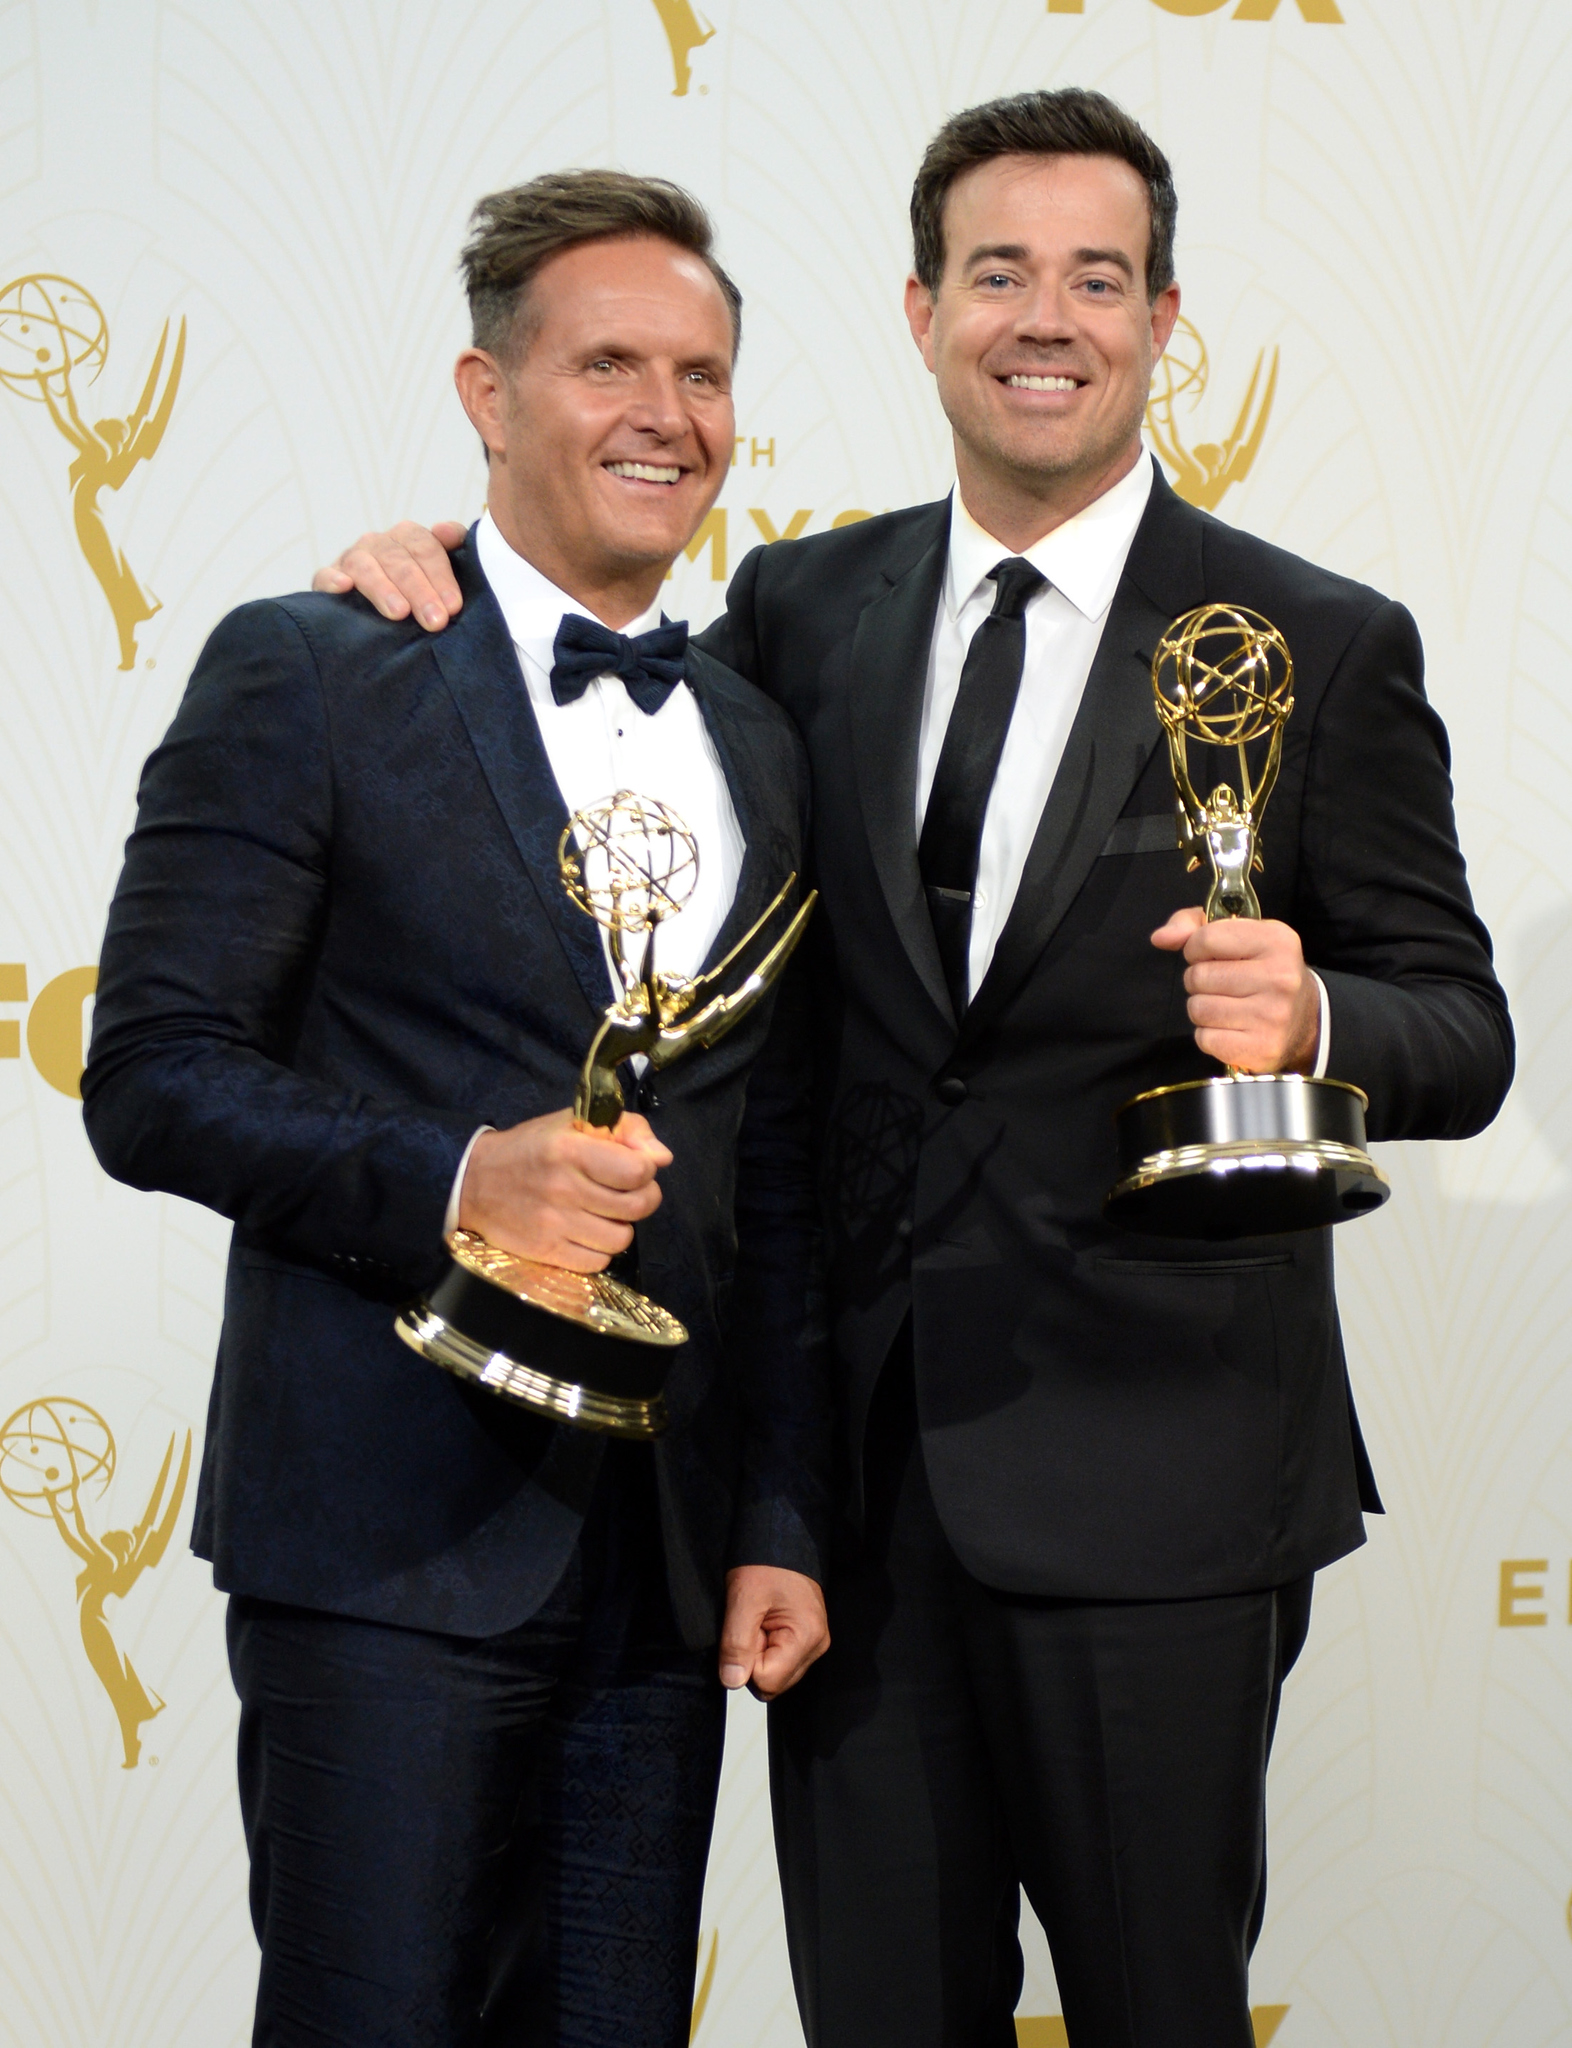 Carson Daly and Mark Burnett at event of The 67th Primetime Emmy Awards (2015)